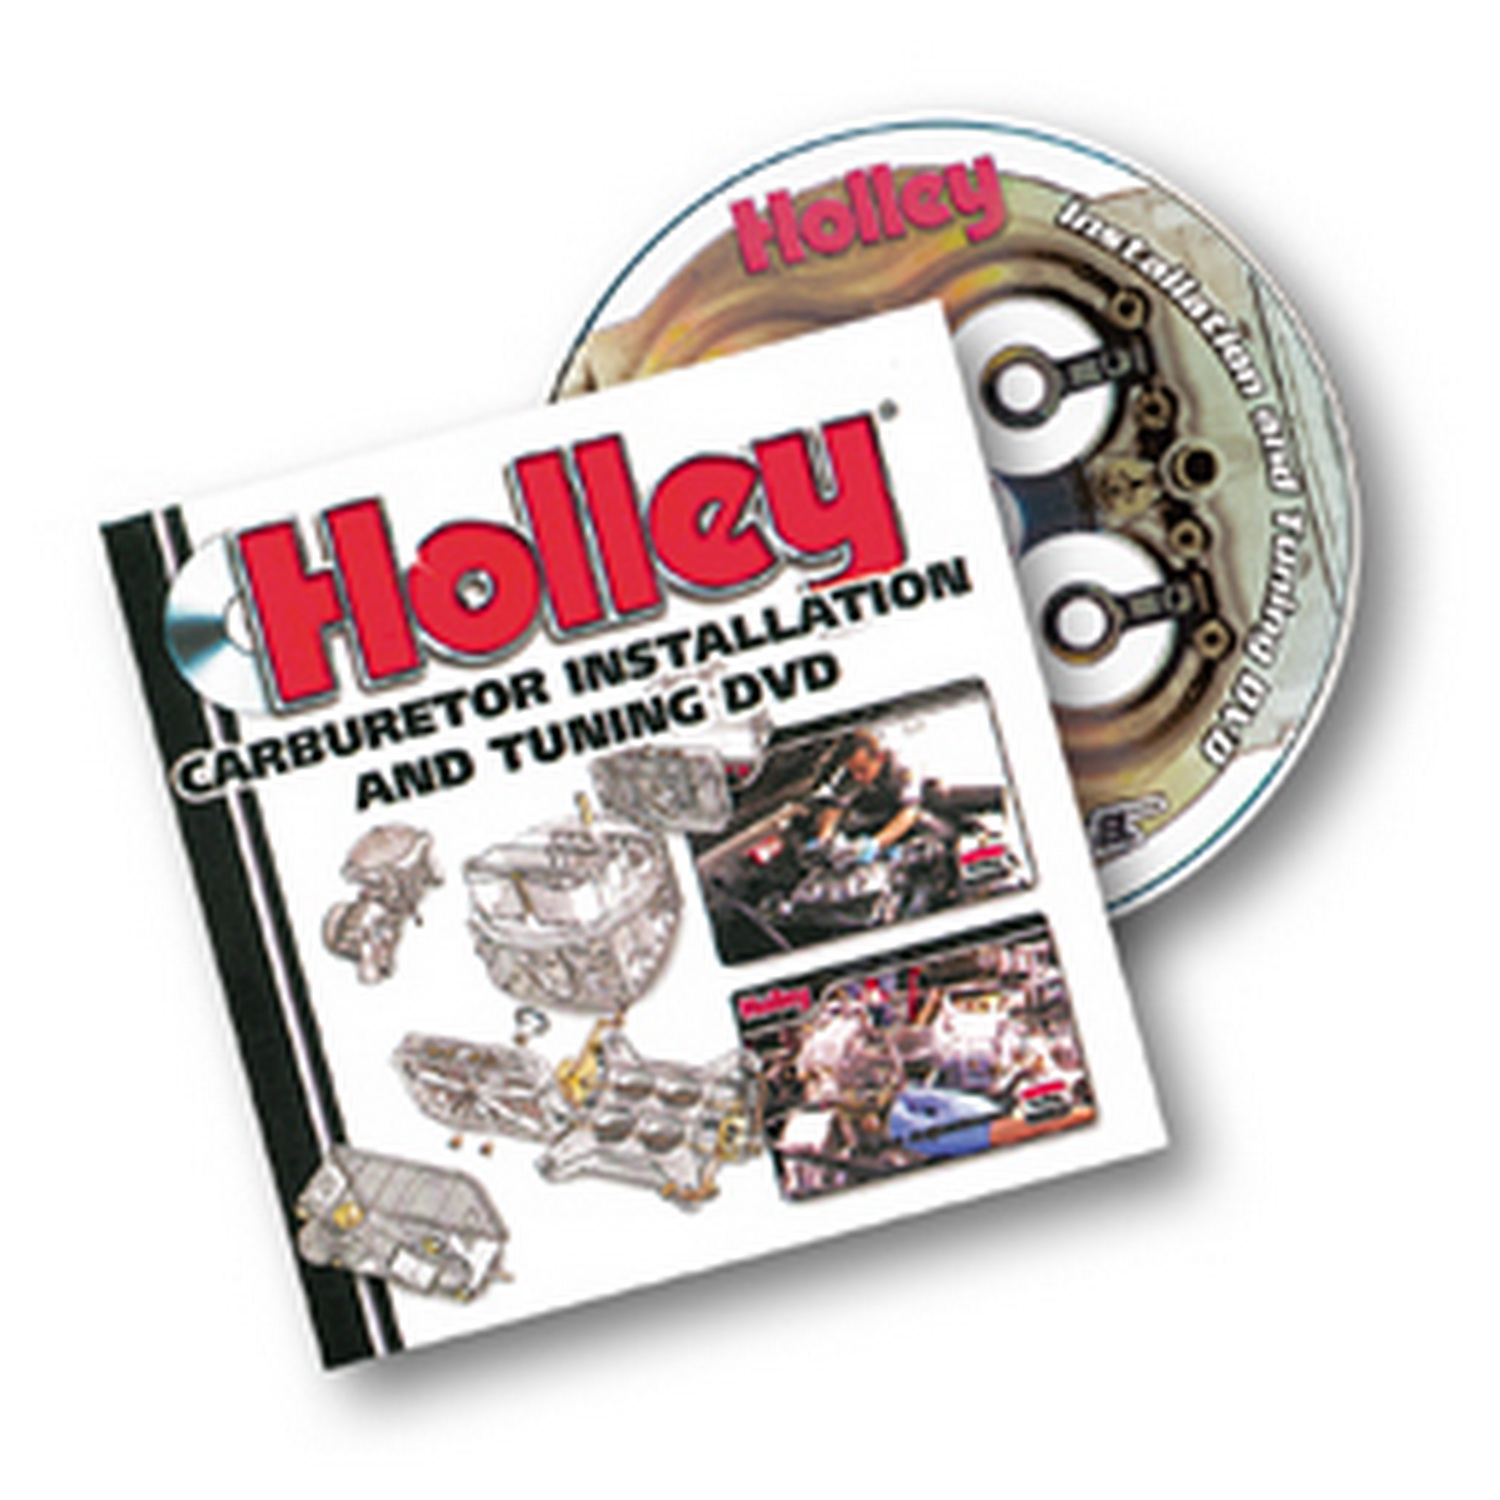 Holley Performance Holley Performance 36-378 Carburetor Installation And Tuning DVD